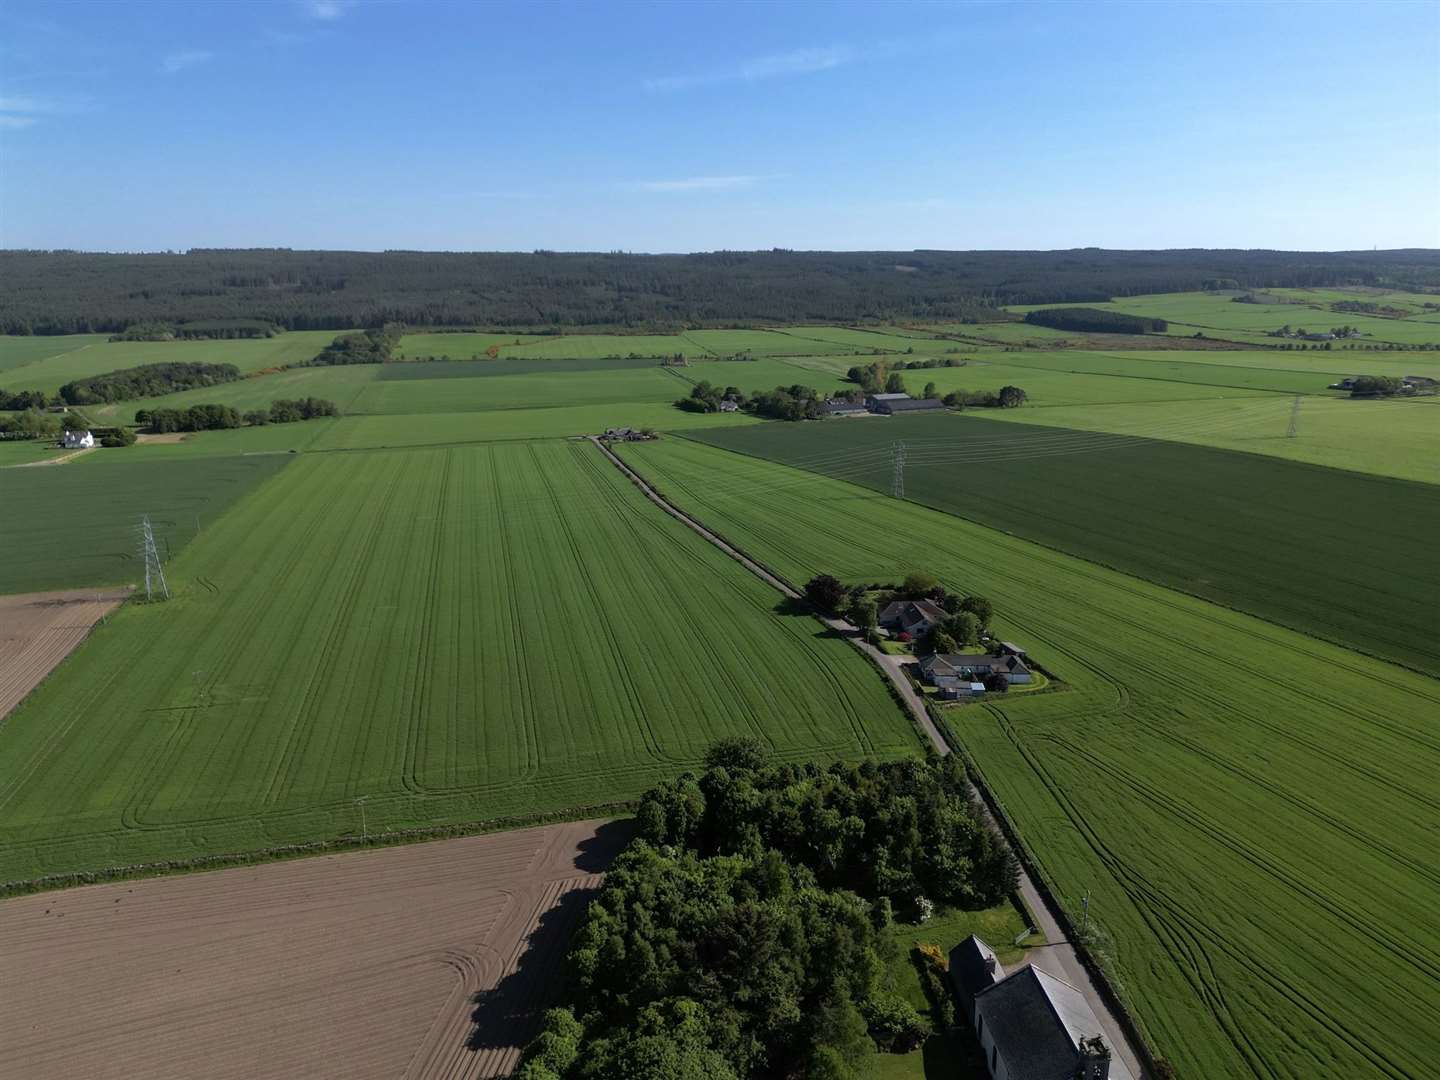 The farmland stretches across more than 670 acres.